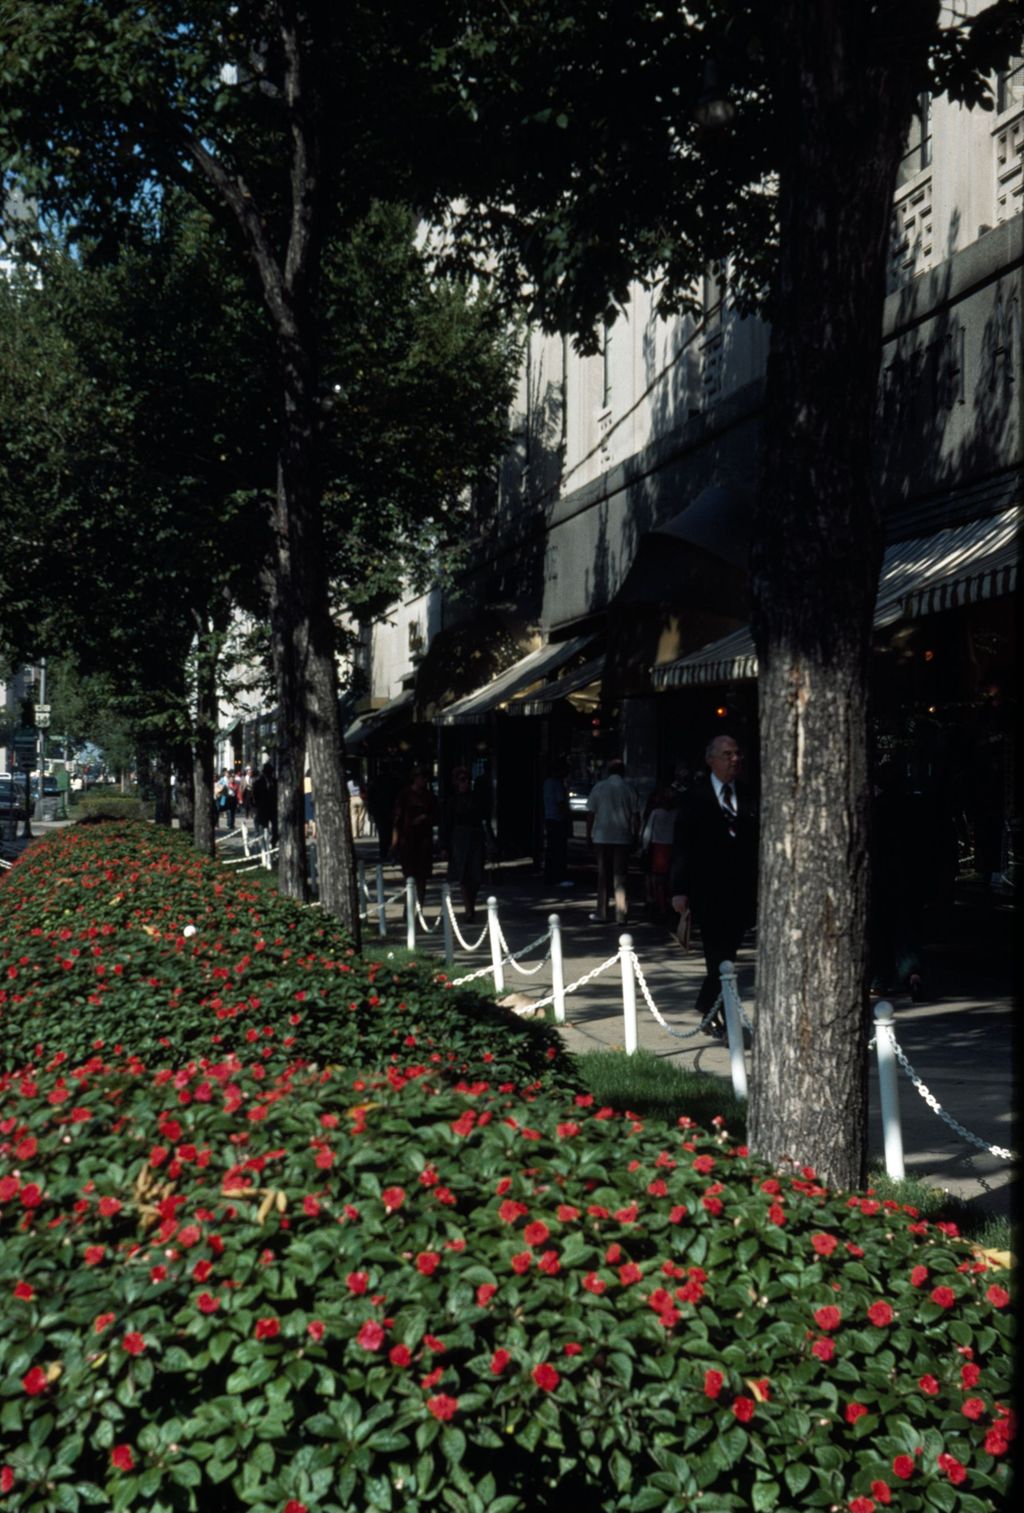 Flower beds in front of Saks Fifth Avenue